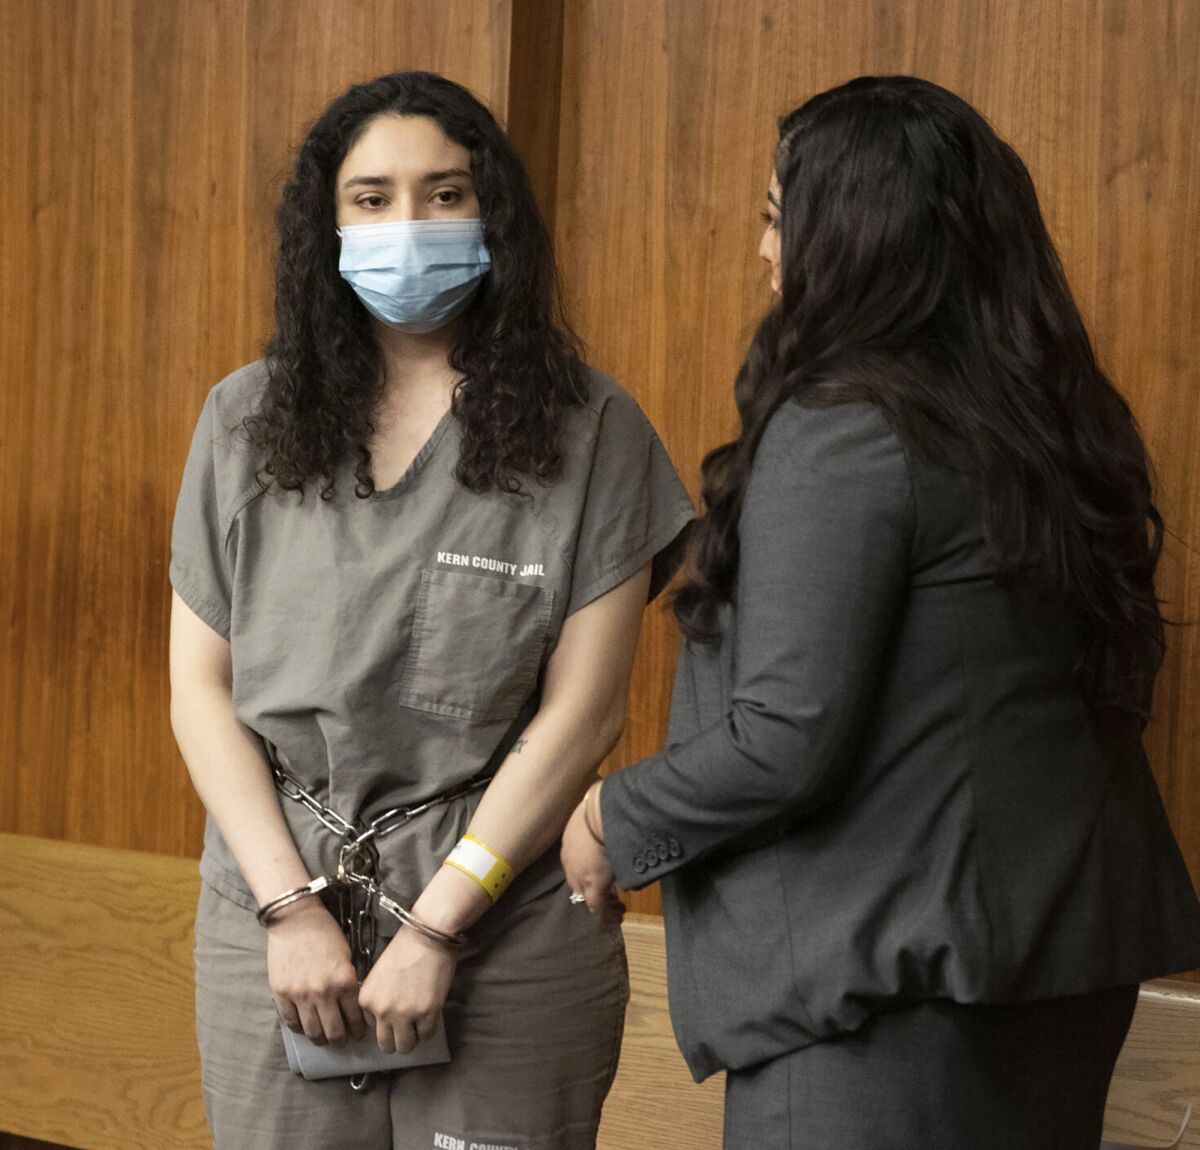 Jacqueline West, left, stands at her arraignment with attorney Alekxia Torres-Stallings in Kern County Superior Court in Bakersfield, Calif., Thursday, March 3, 2022. Jacqueline and Trezell West, the adoptive parents of two small California boys who were reported missing in 2020, have been charged with killing the children, although their bodies have not been found. (Rodney Thornburg/The Bakersfield Californian via AP)